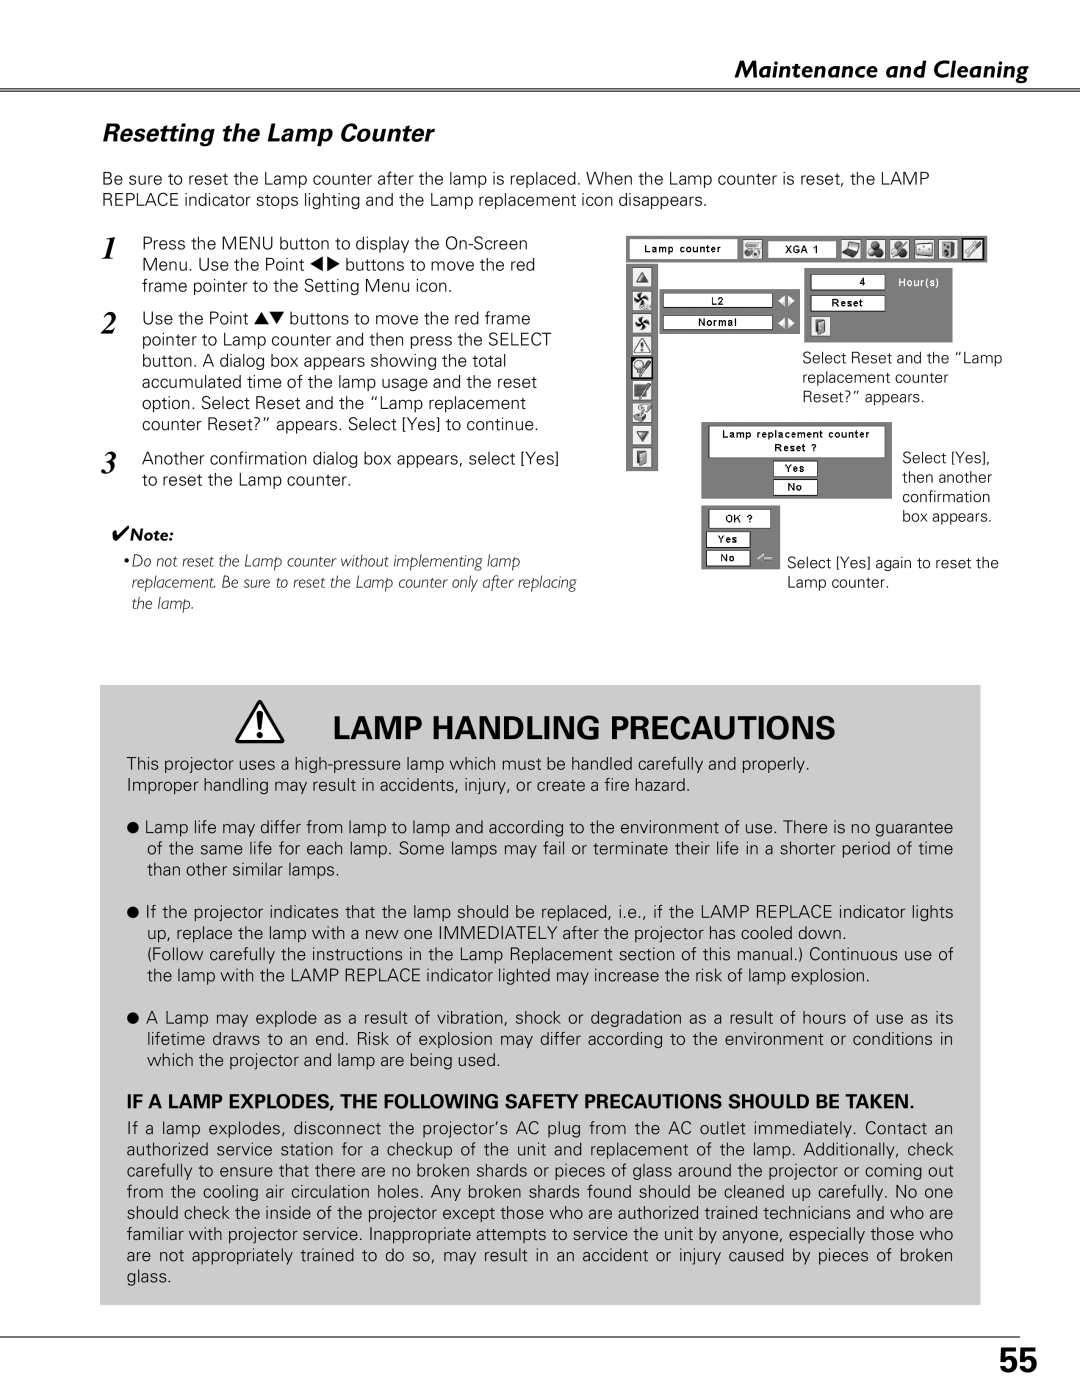 Eiki LC-XB41 owner manual Maintenance and Cleaning Resetting the Lamp Counter, Lamp Handling Precautions 